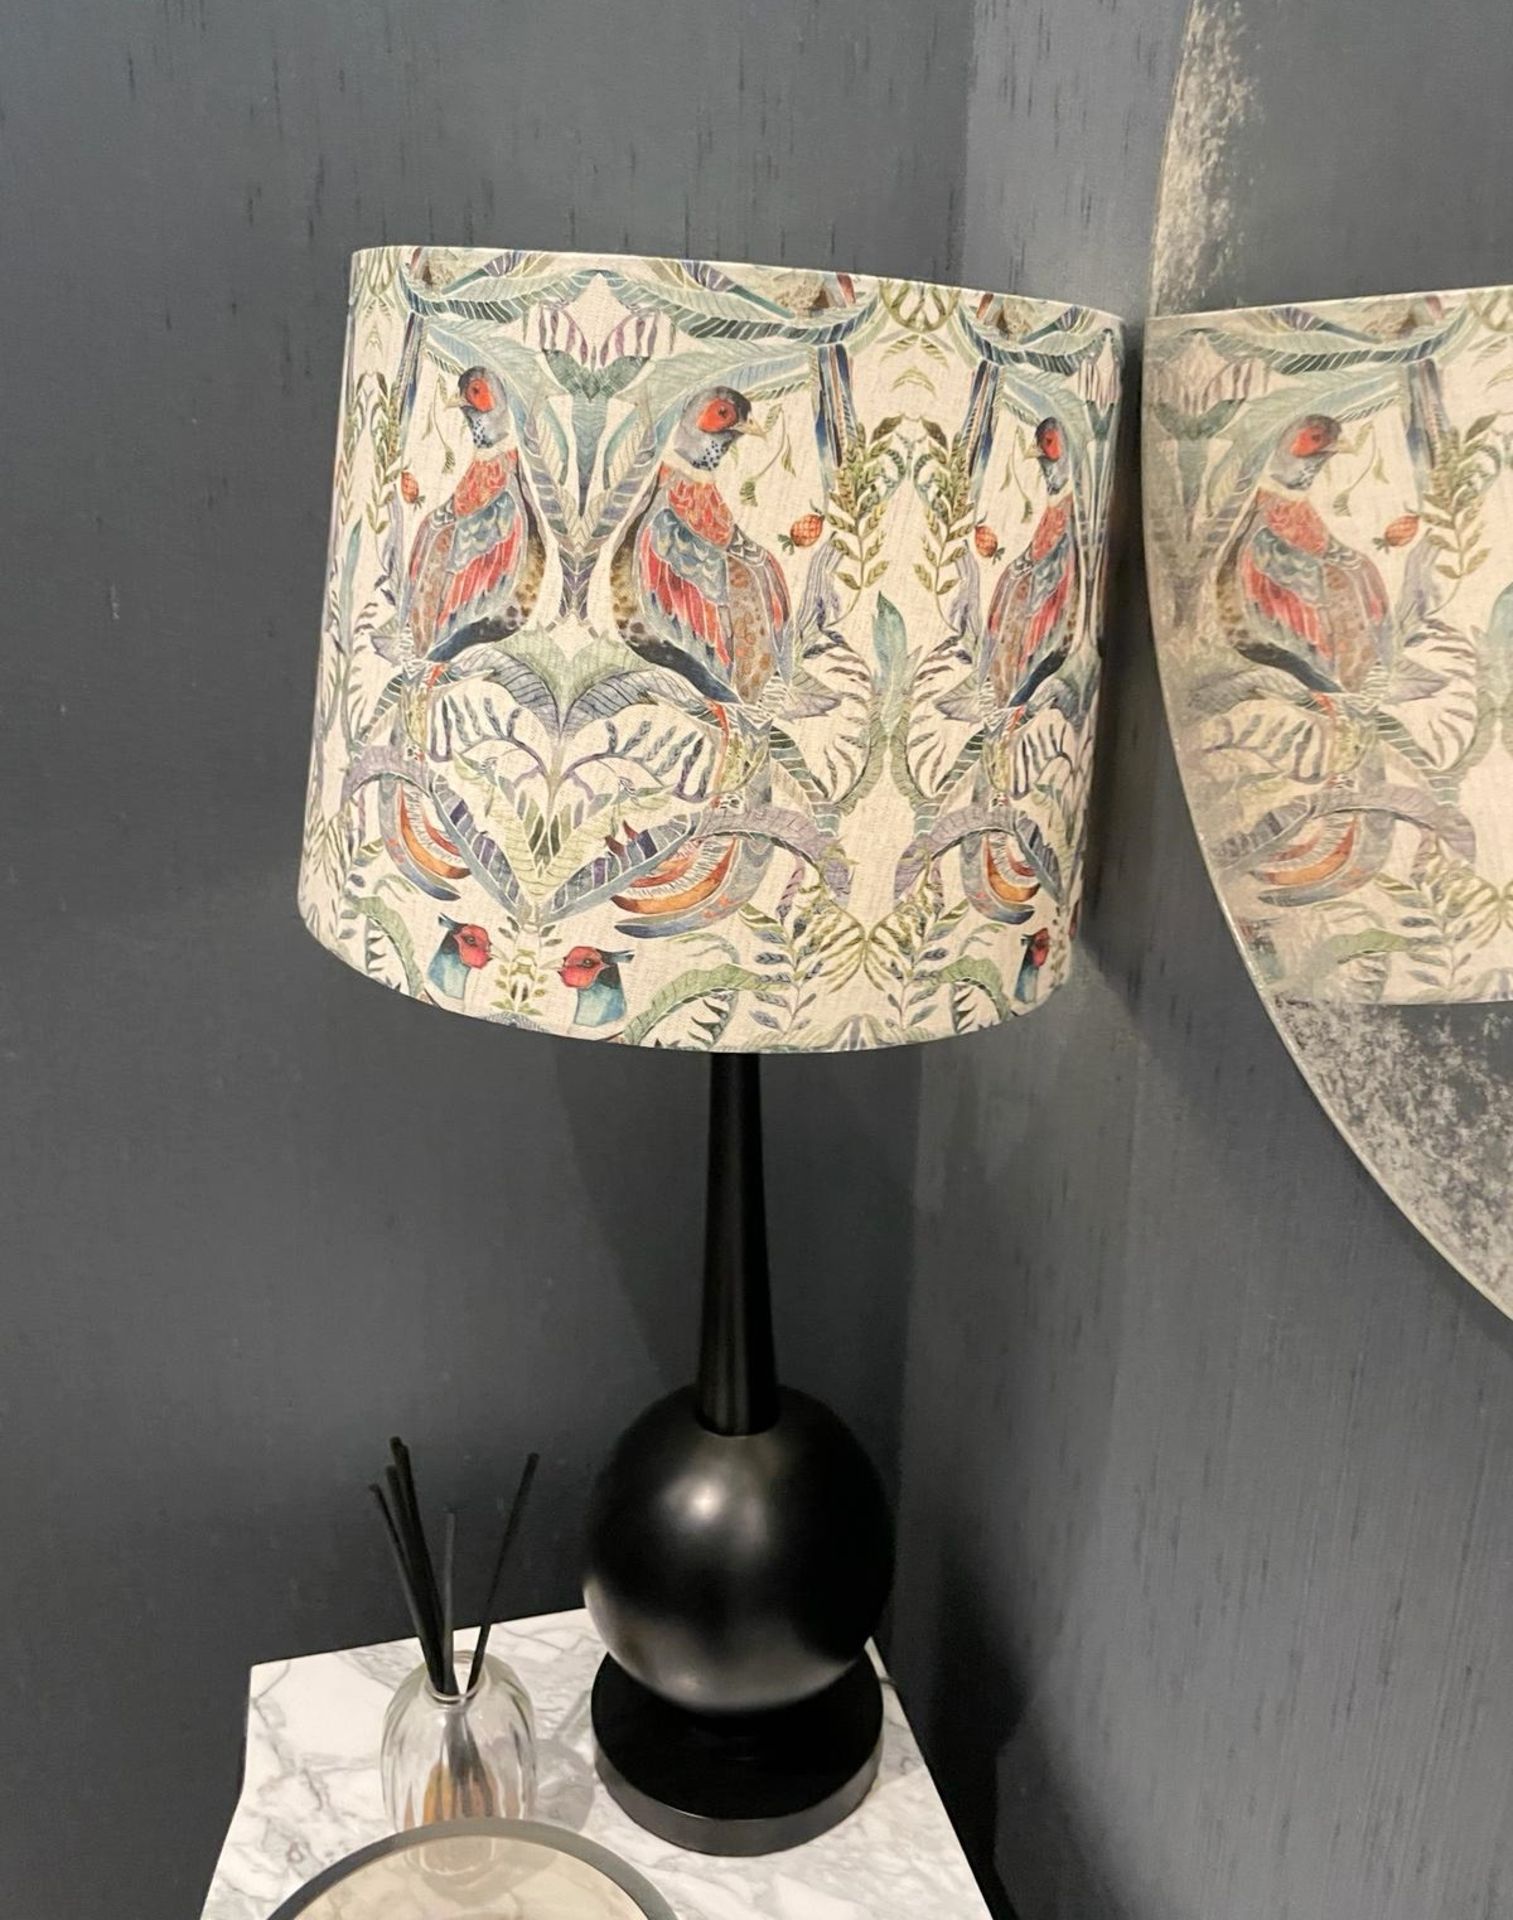 1 x Sleek Designer Table Lamp With Large Decorated Shade, 85cm Tall - CL894 - NO VAT ON THE HAMMER - Image 5 of 7